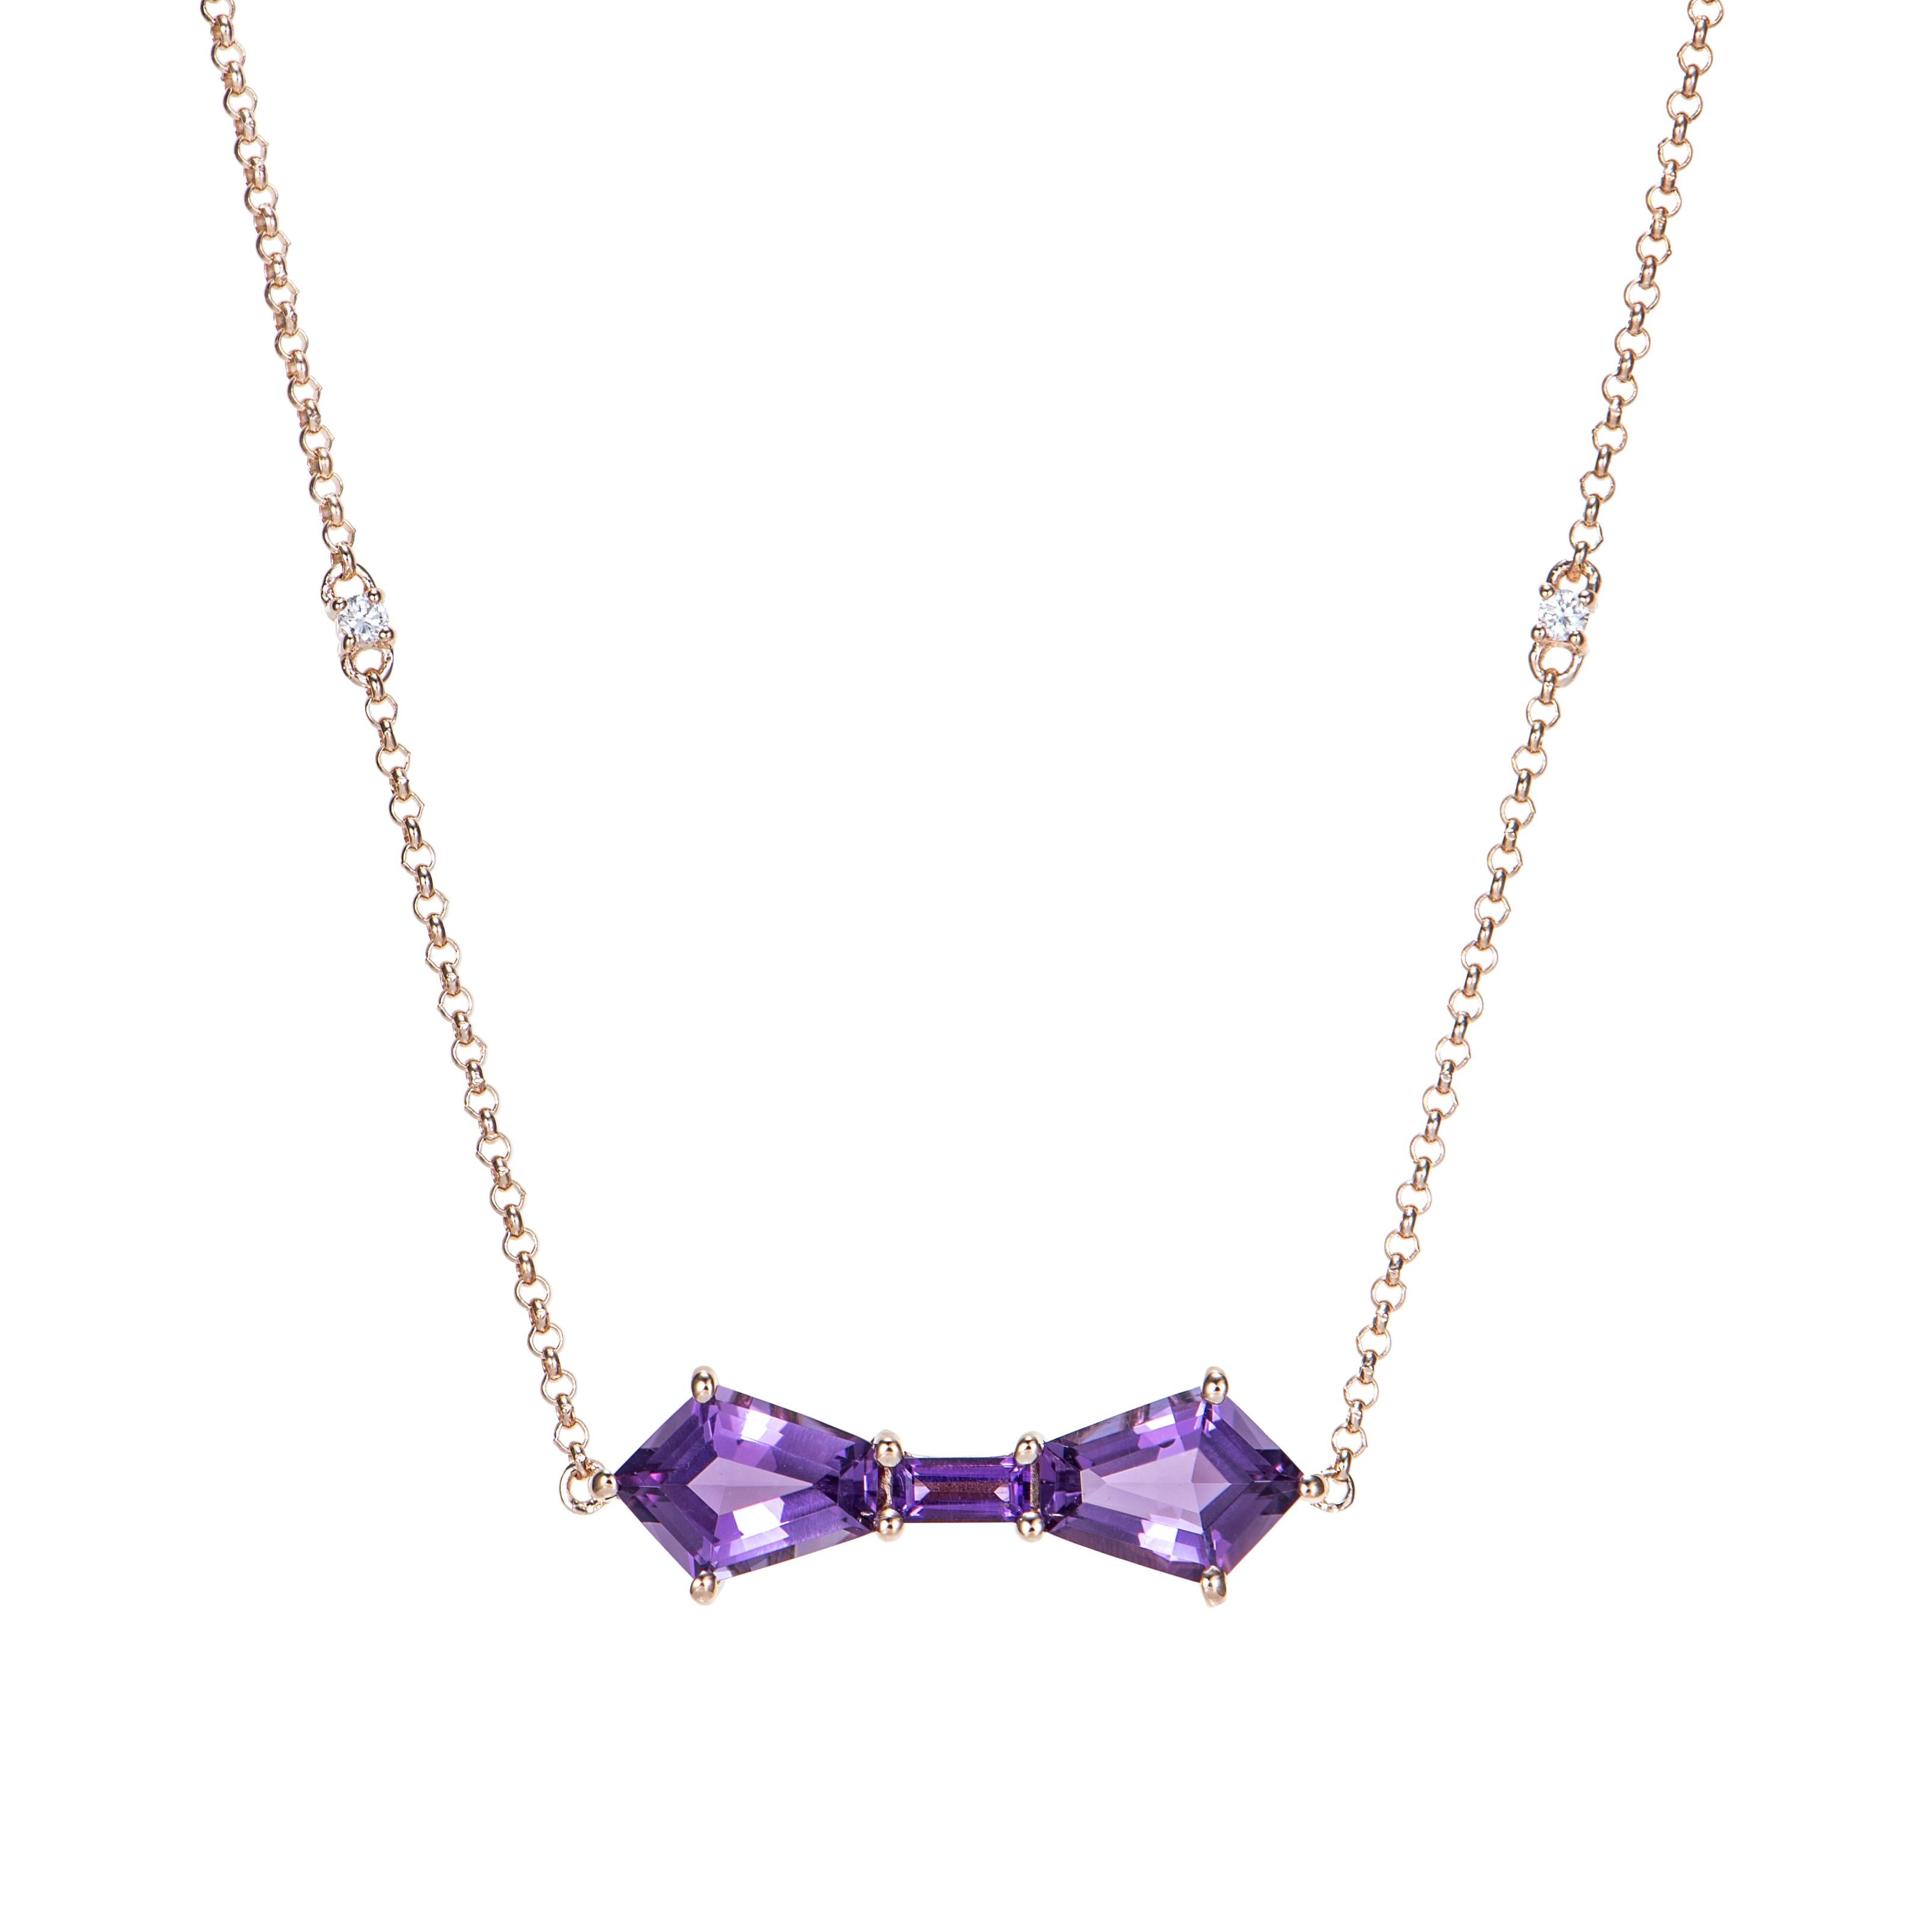 Contemporary 1.64 Carat Amethyst Pendant in 14 Karat Rose Gold with White Diamond. For Sale